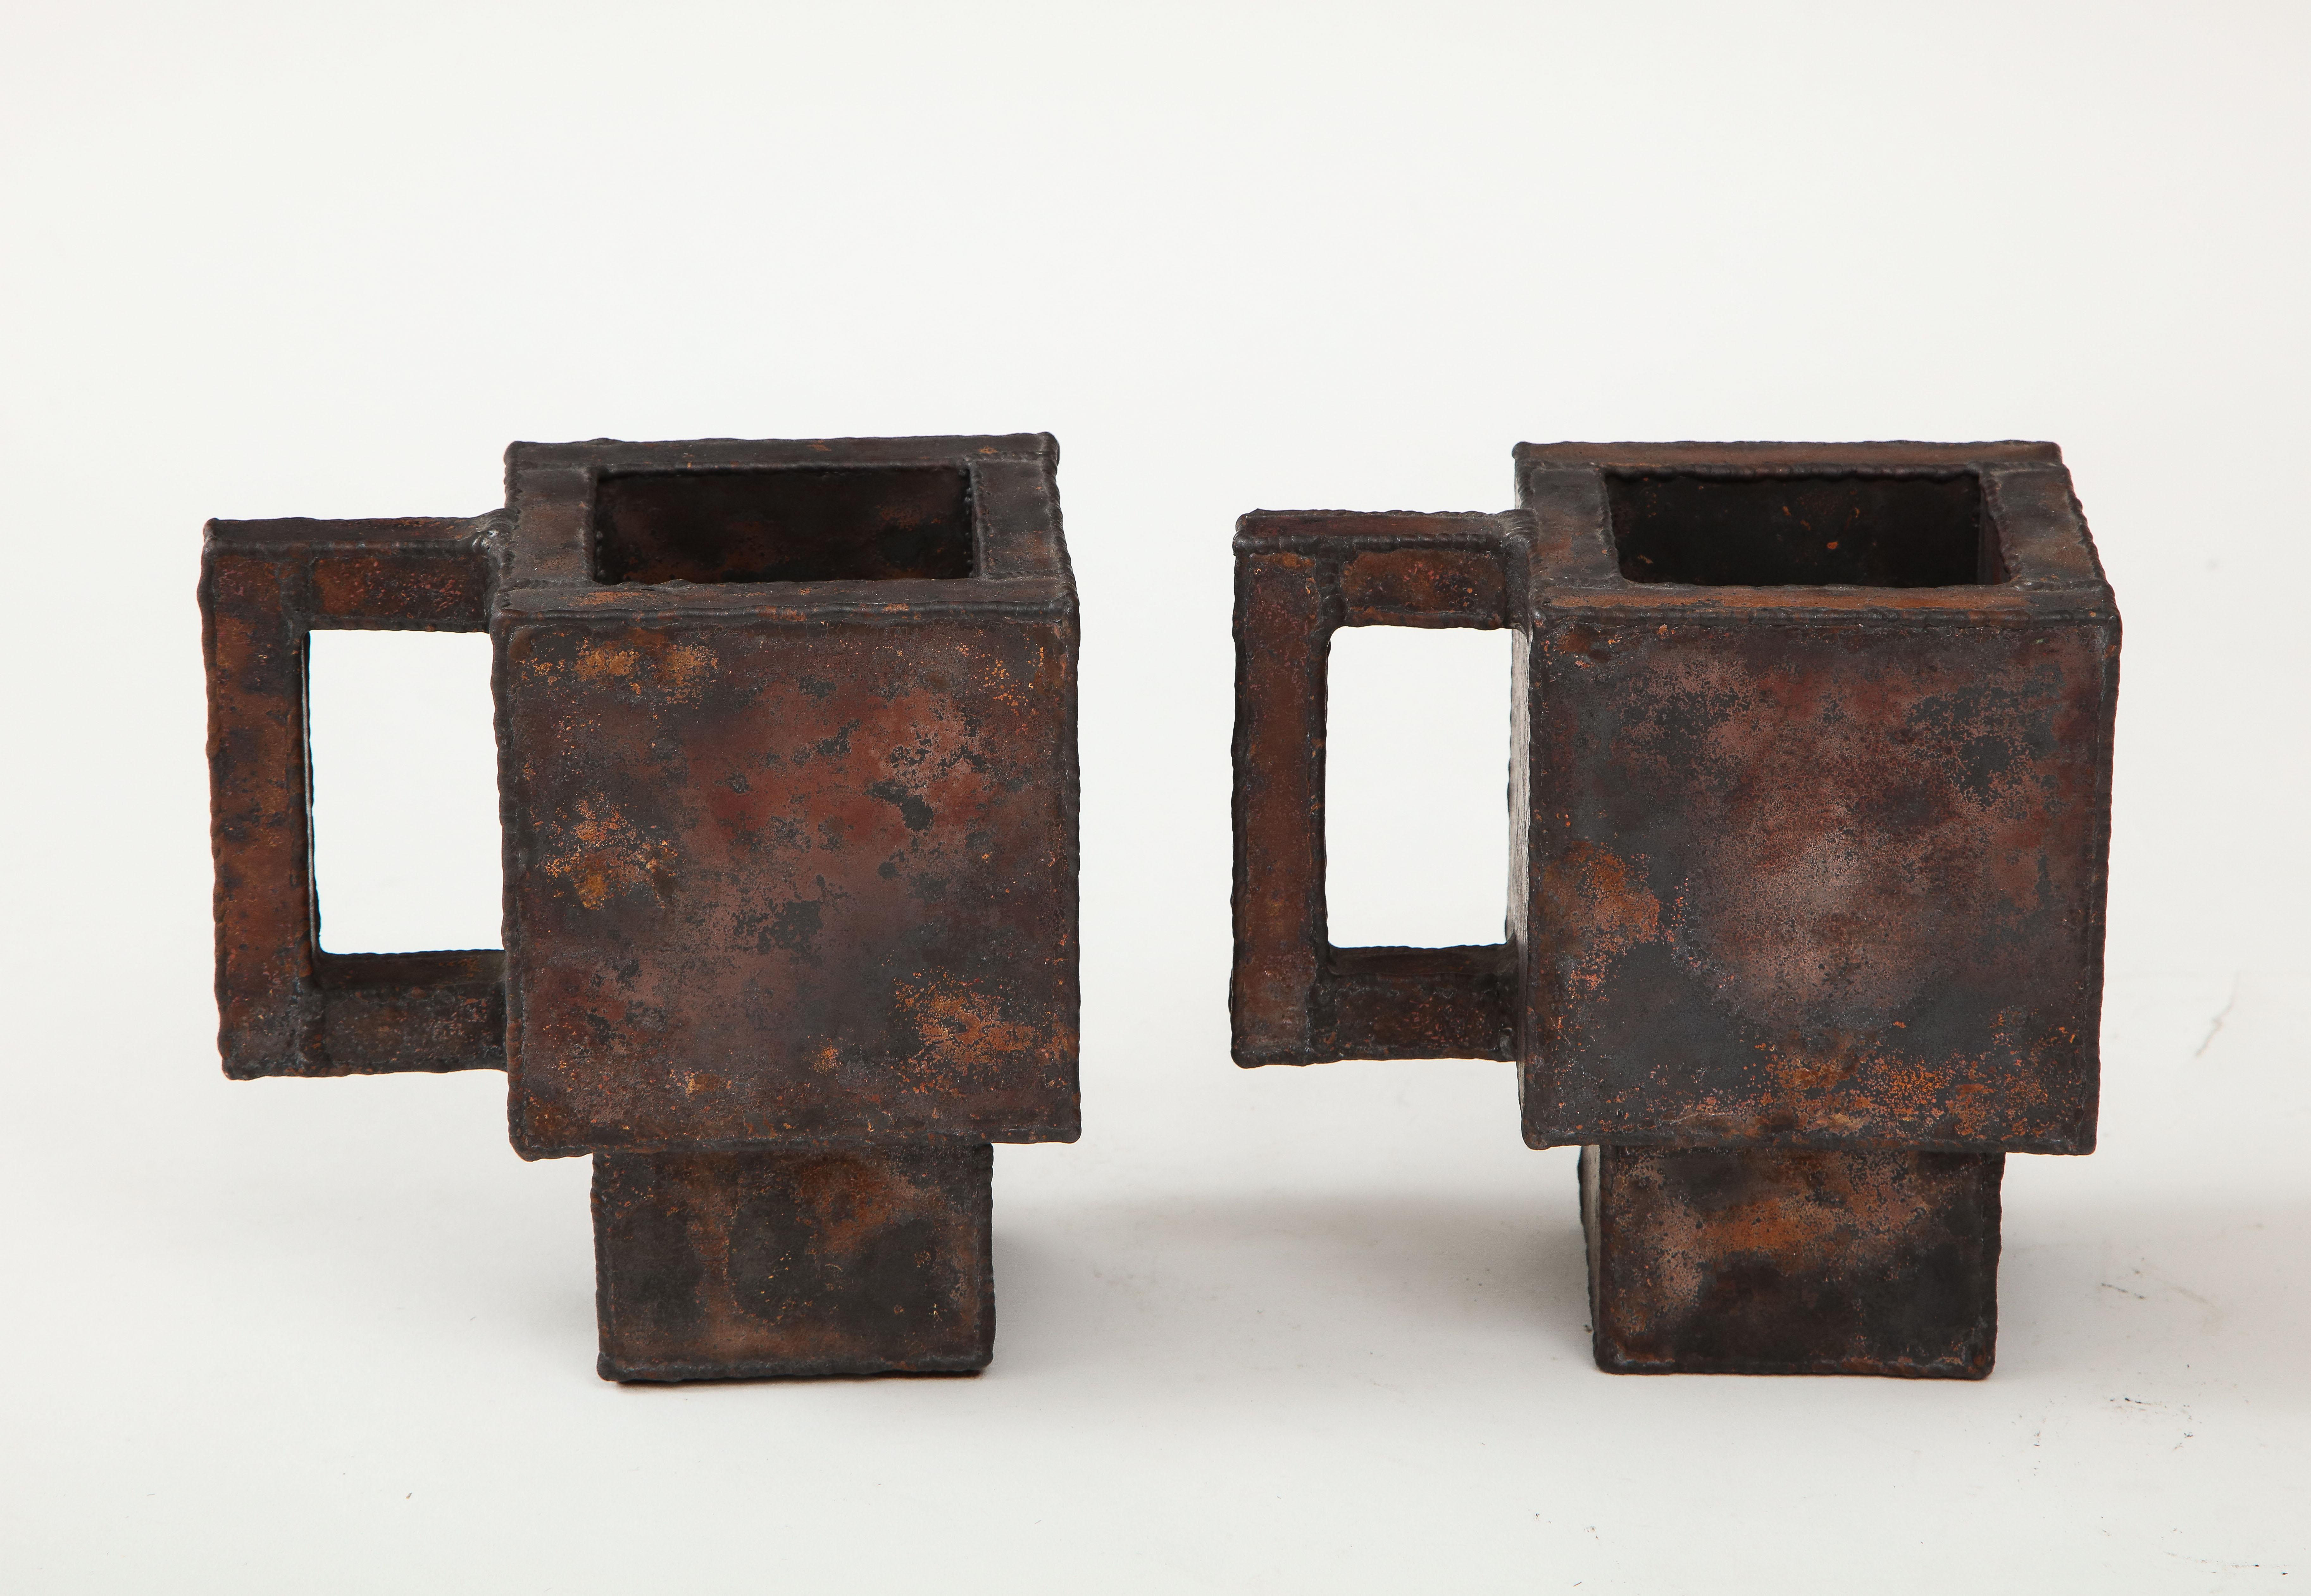 Pair of Red & Green Enameled Copper Mugs by Kwangho Lee, c. 2012 For Sale 2